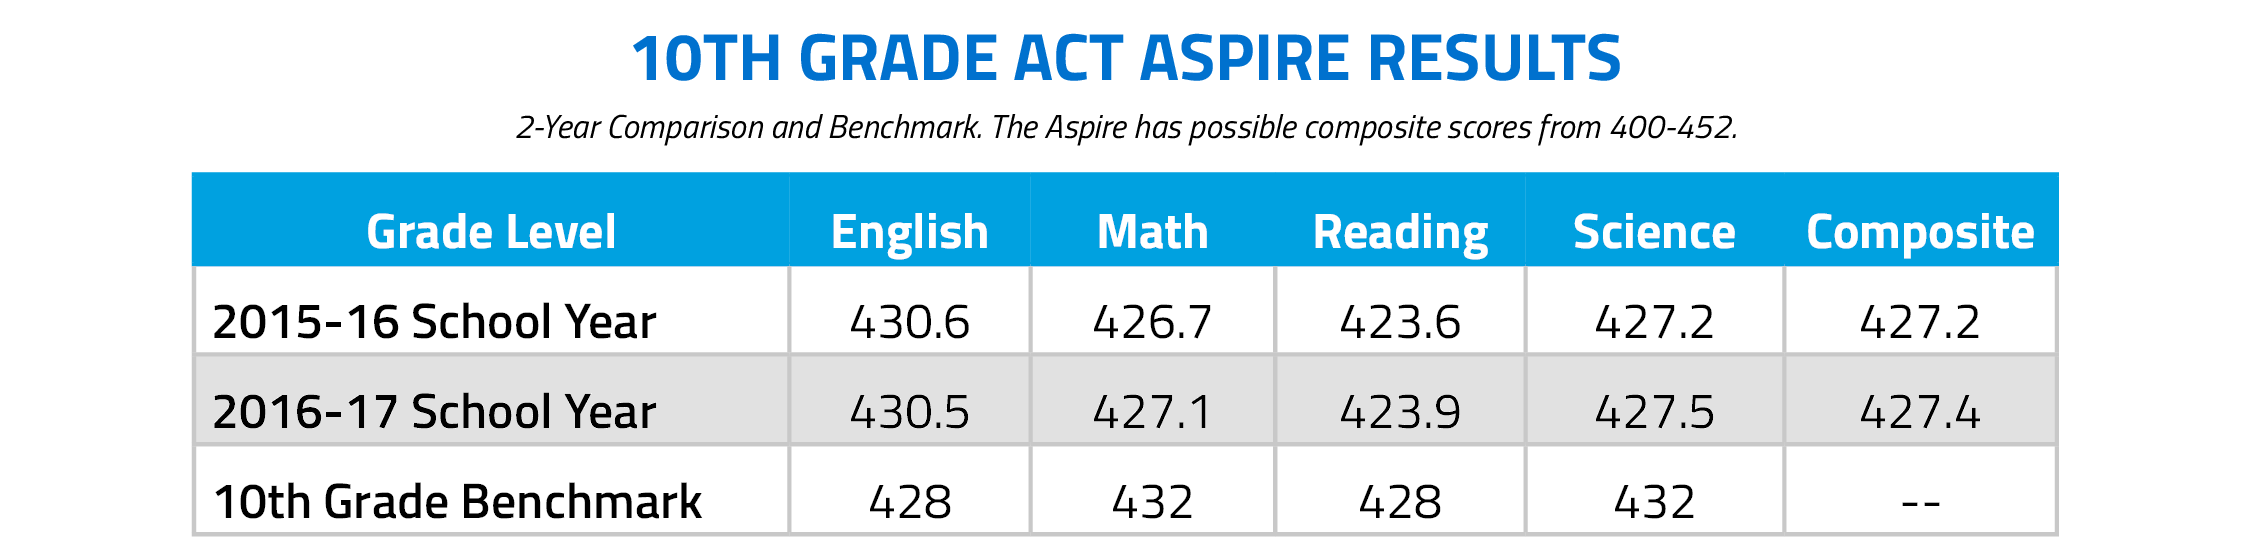 10th Grade ACT Aspire Results. Two-Year comparison and benchmark. The Aspire has possible composite scores from 400-452.